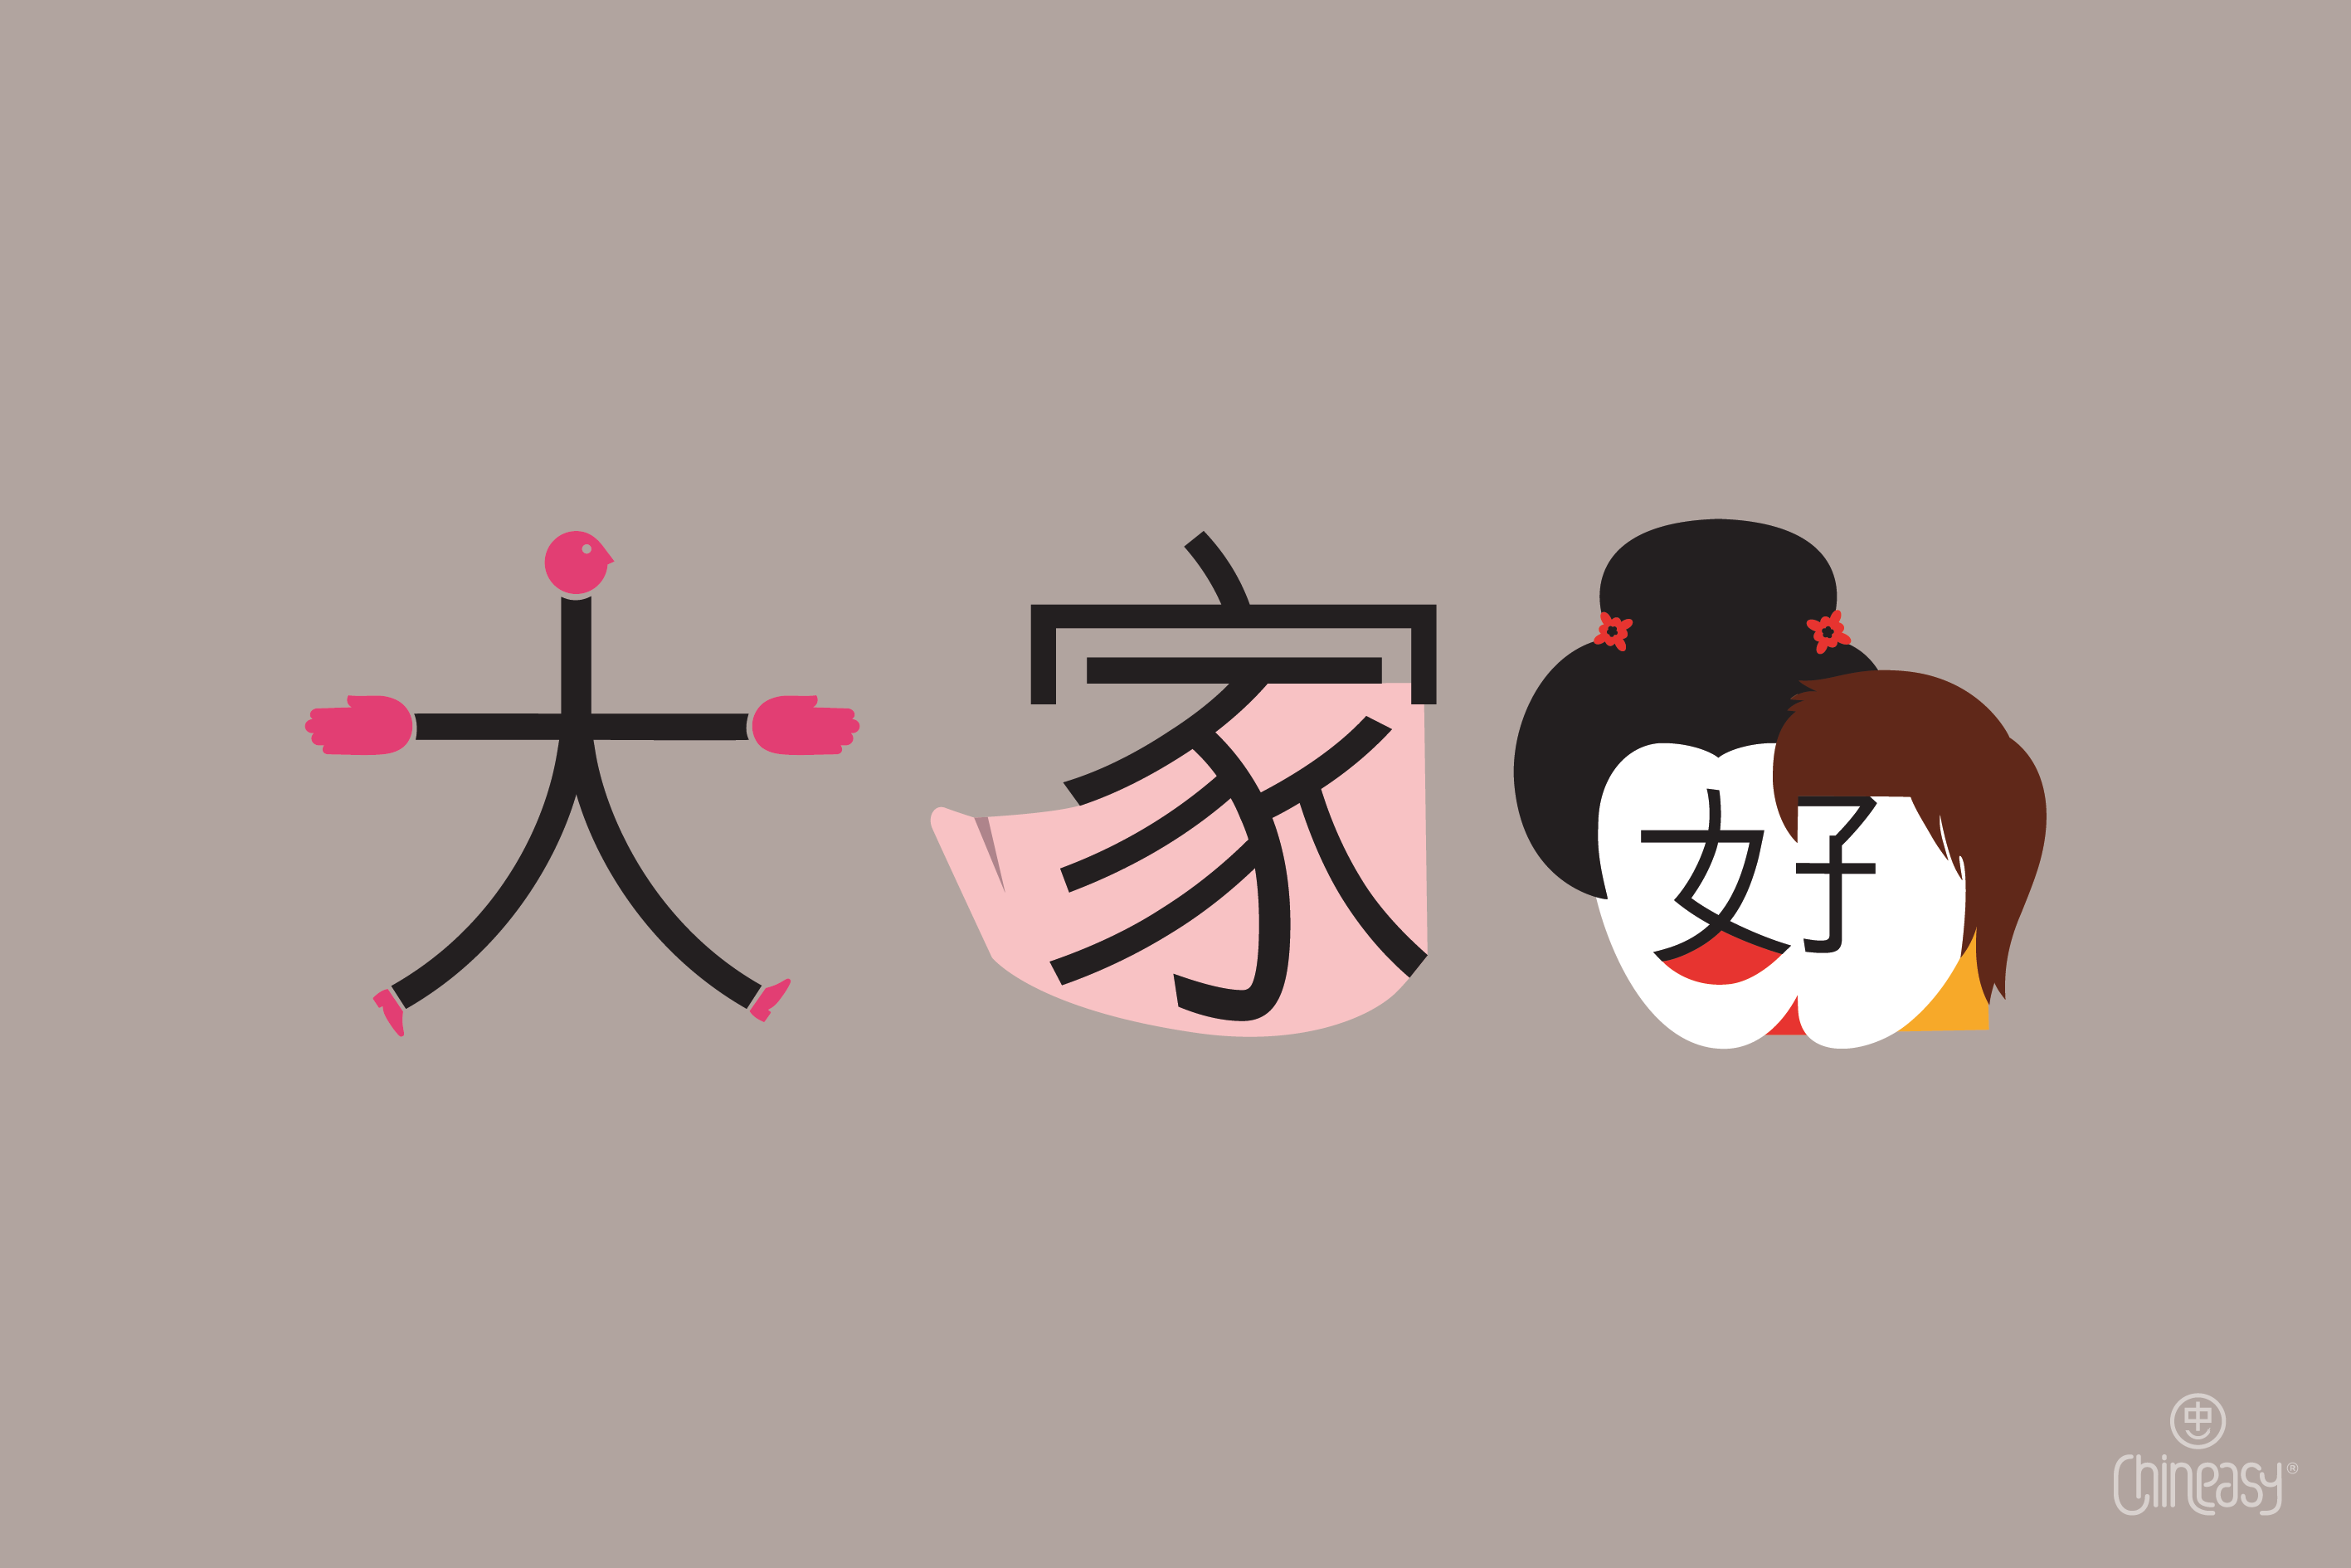 Chineasy Blog  For Beginners: 28 Easiest Chinese Greetings